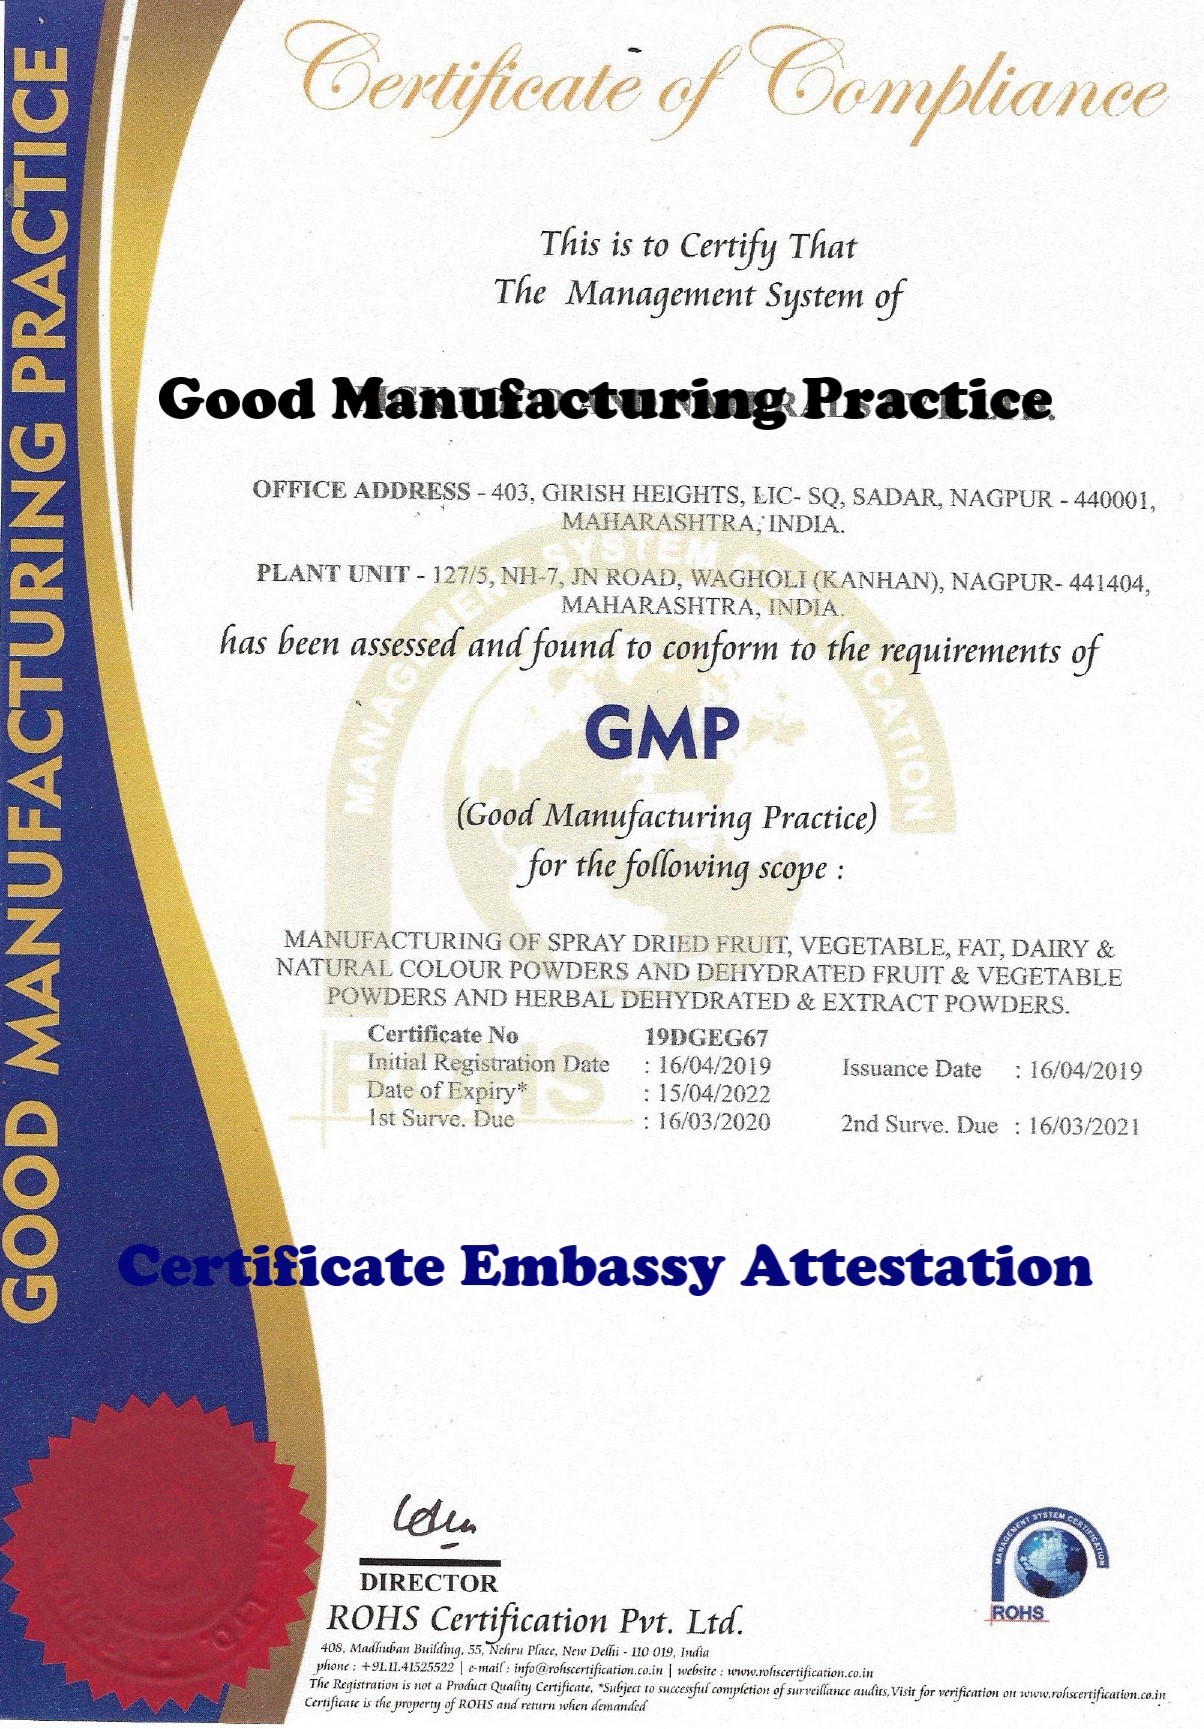 GMP Certificate Attestation from Mauritius Embassy